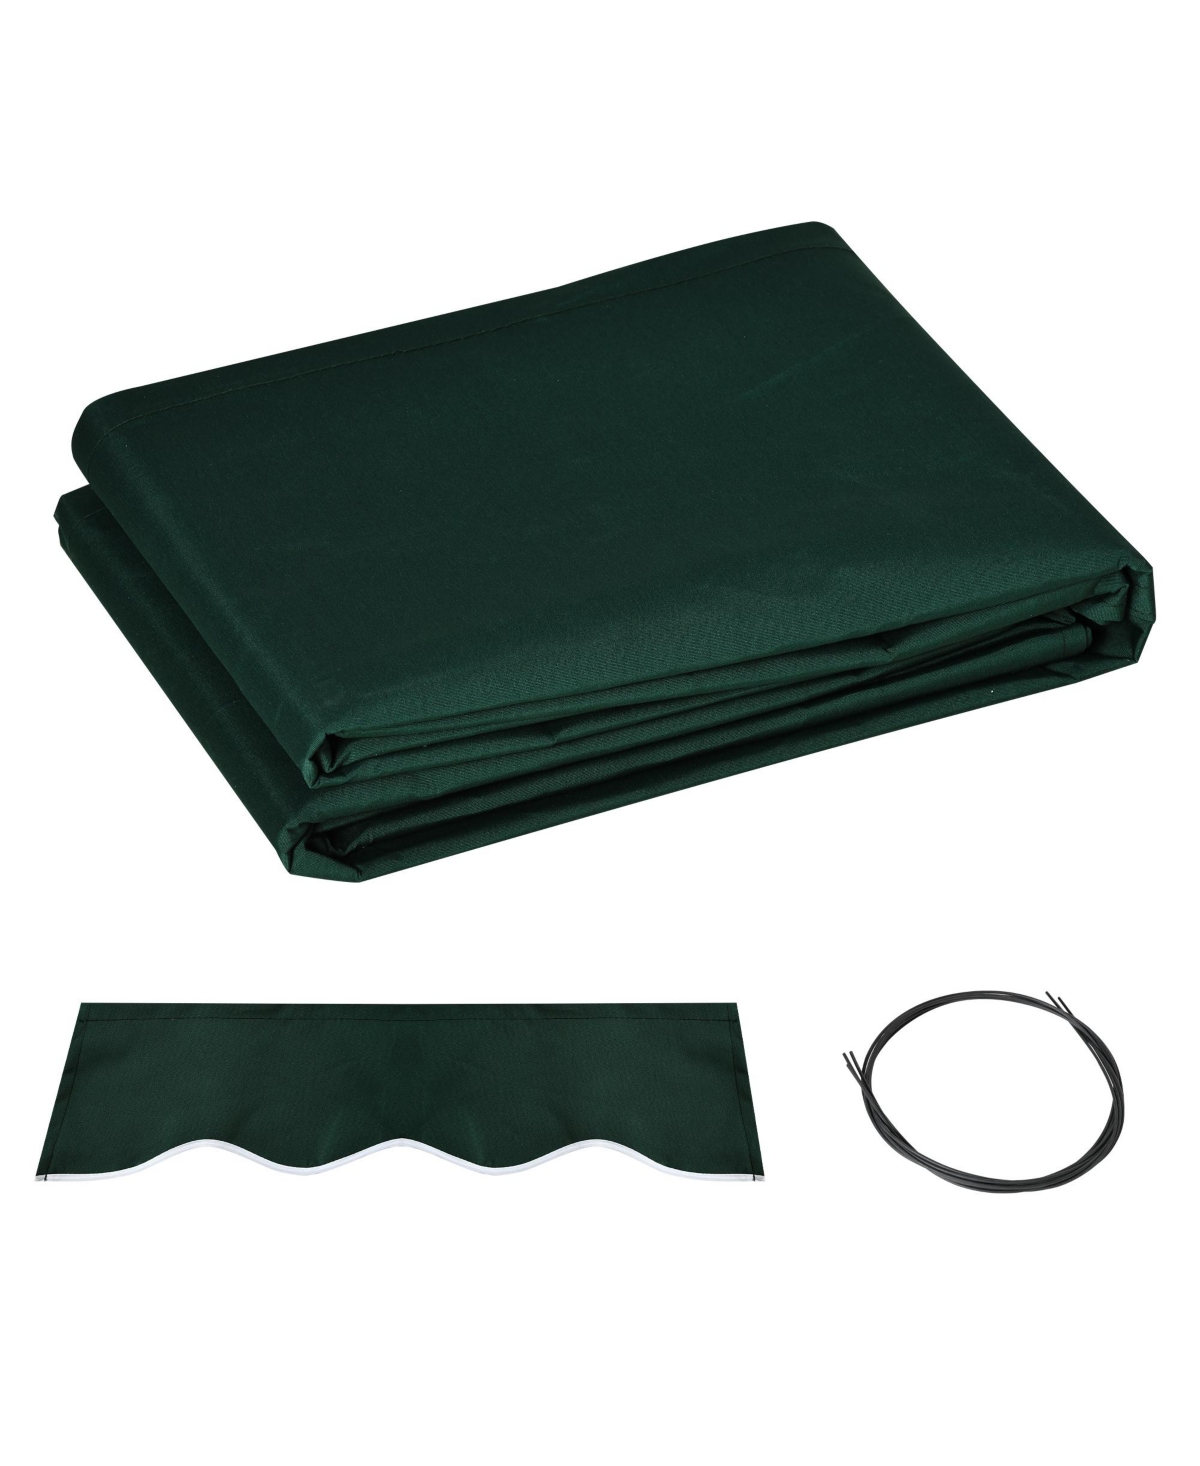 12.5' x 7.9' Retractable Awning Fabric Replacement Outdoor Sunshade Canopy Awning Cover, Uv Protection, Dark Green - Dark green